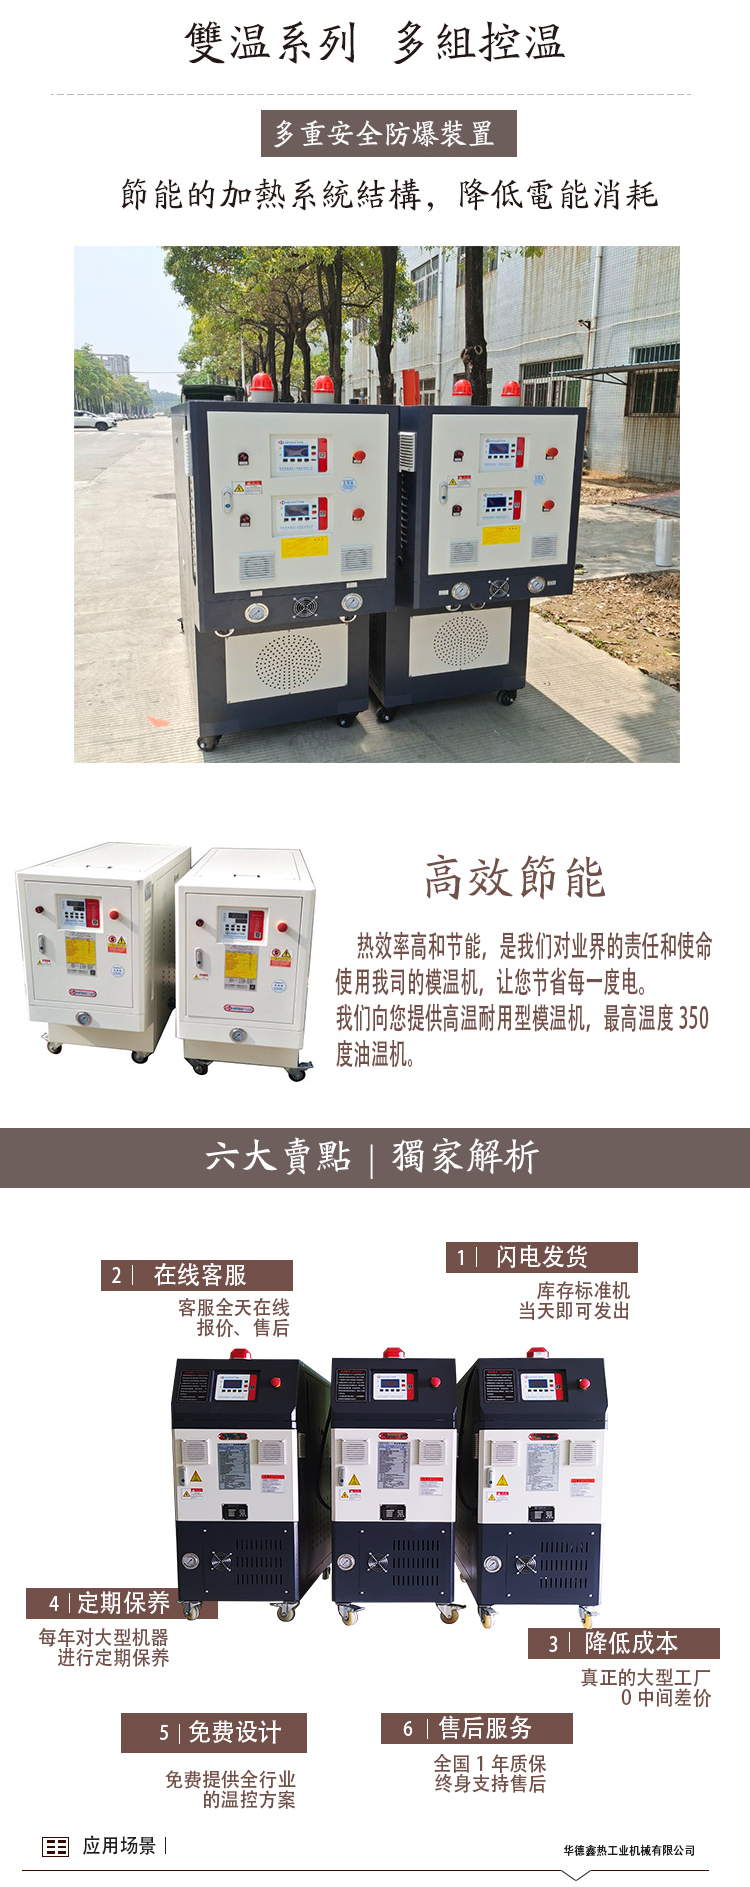 500000 kcal thermal oil electric heater, 45 kW thermal oil furnace heater, explosion-proof oil mold temperature machine